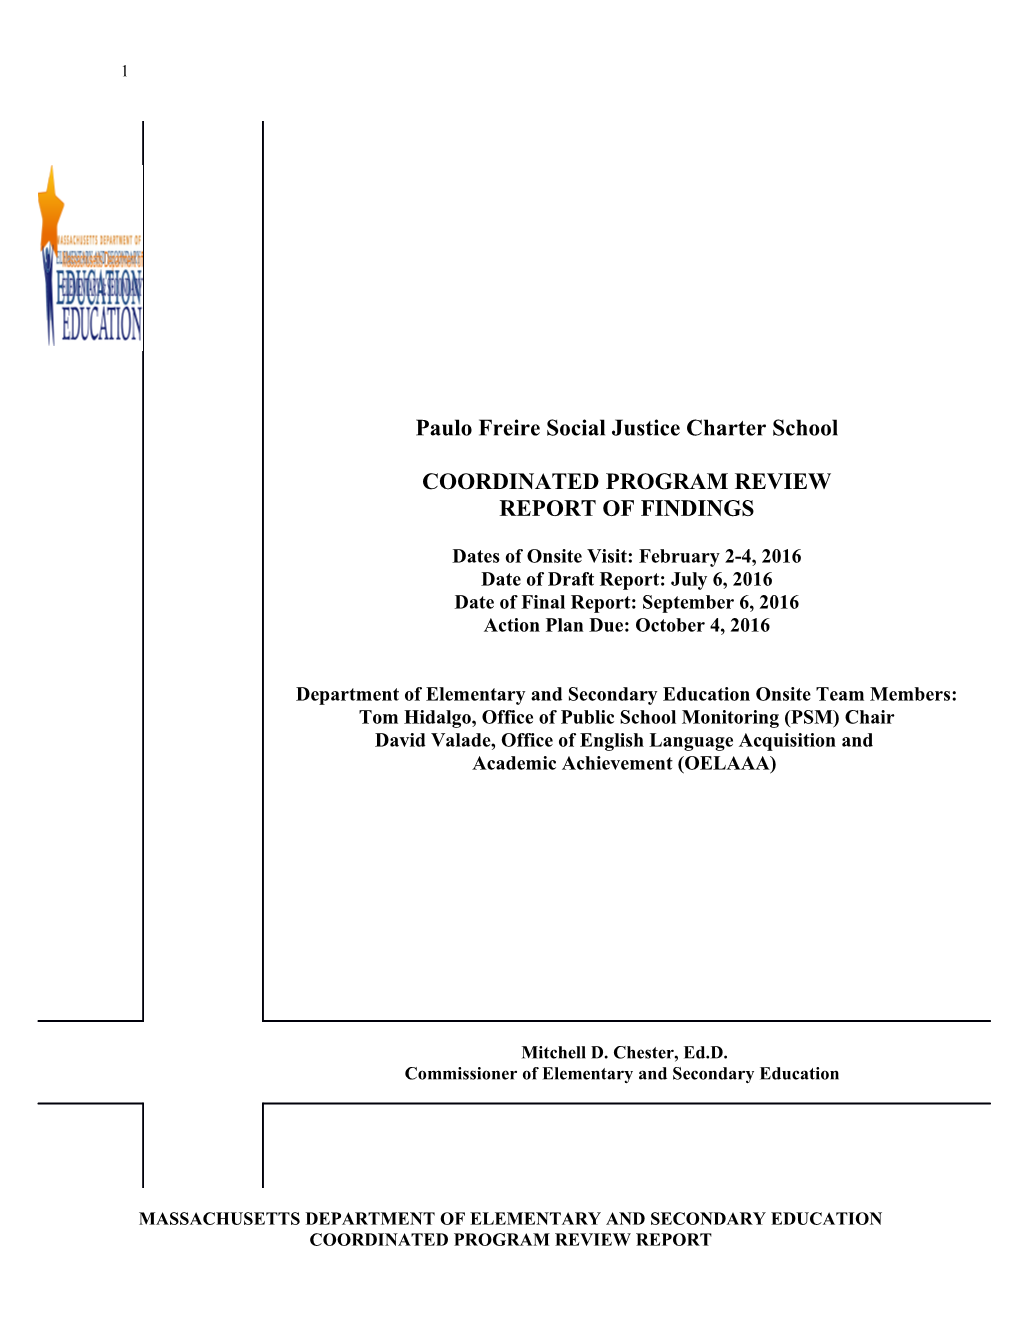 Paulo Friere Social Justice Charter School CPR Final Report 2016